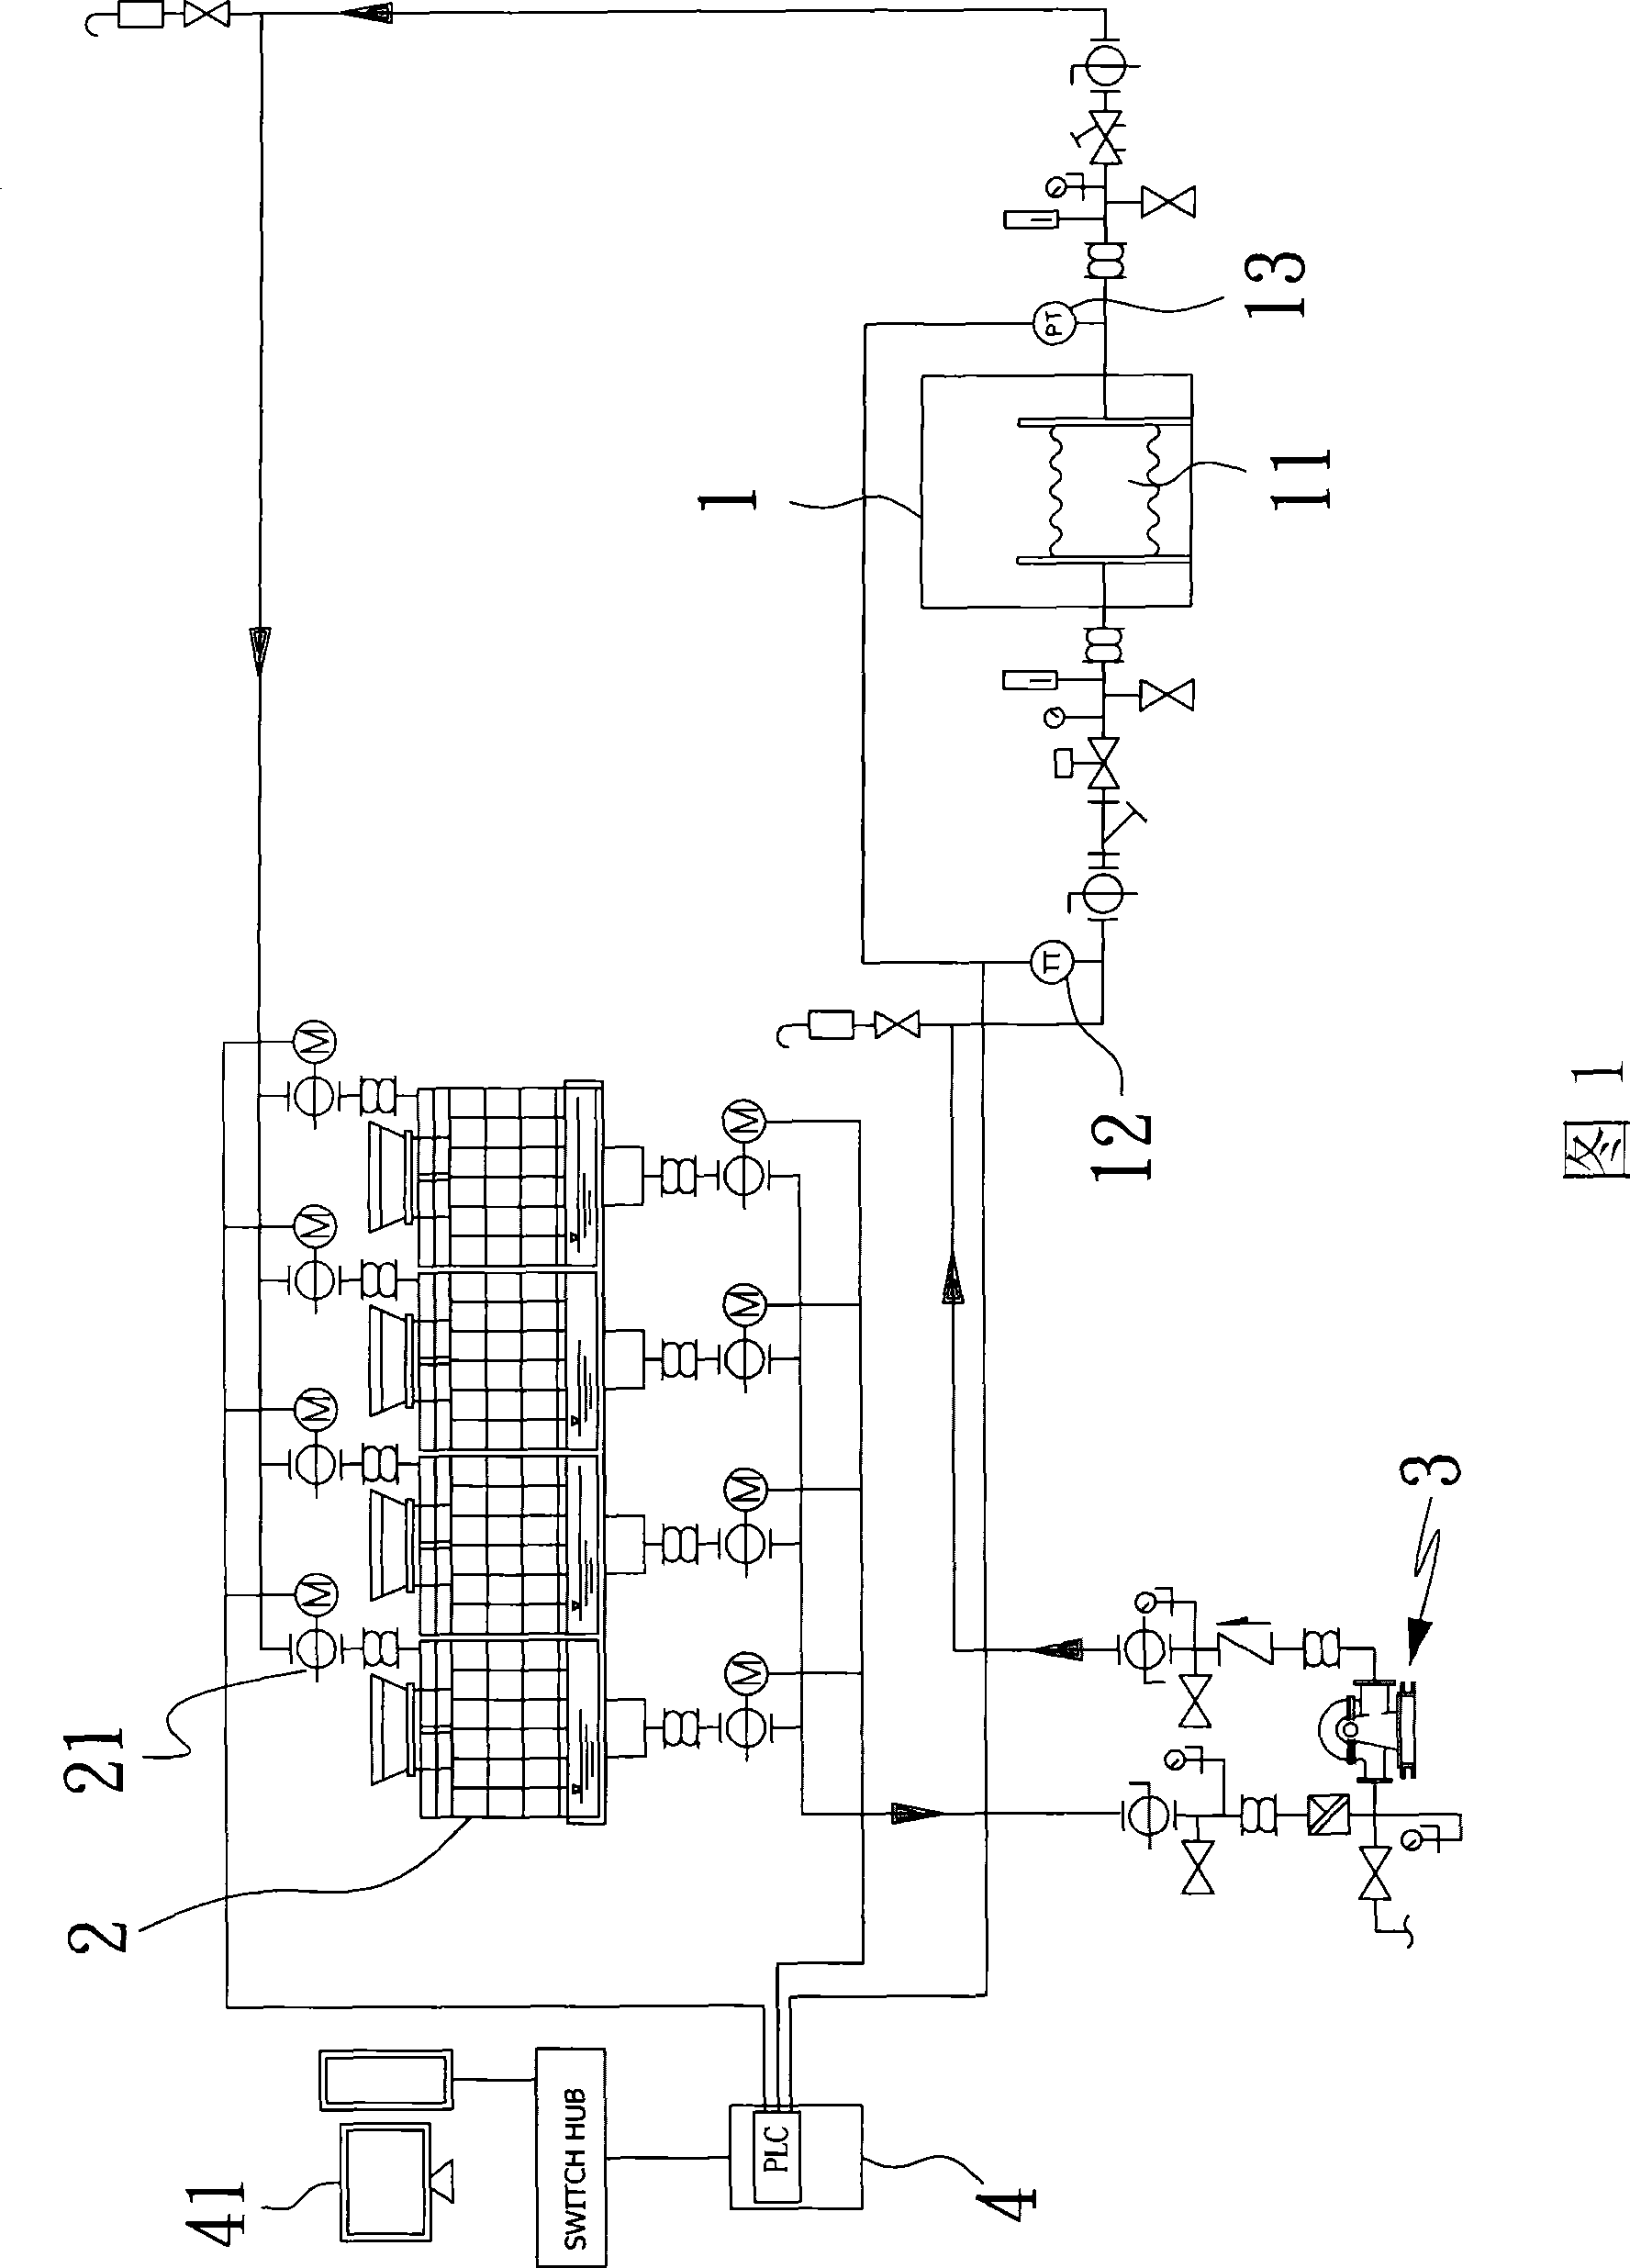 Thermal recovery circulating system of air compressor